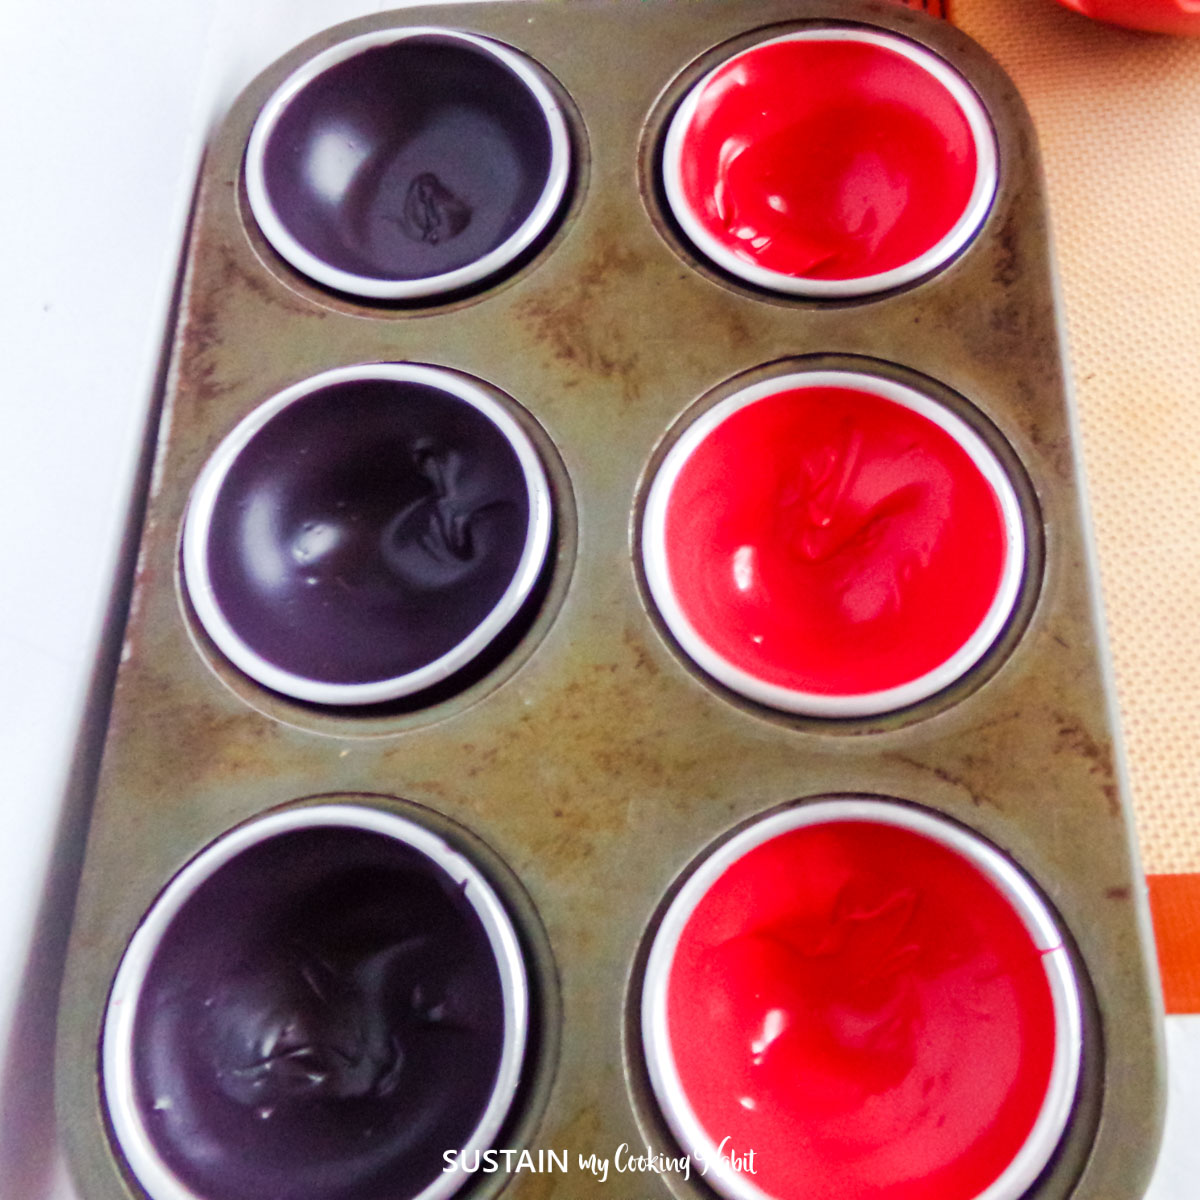 Melted black and red chocolate in a silicone mold.